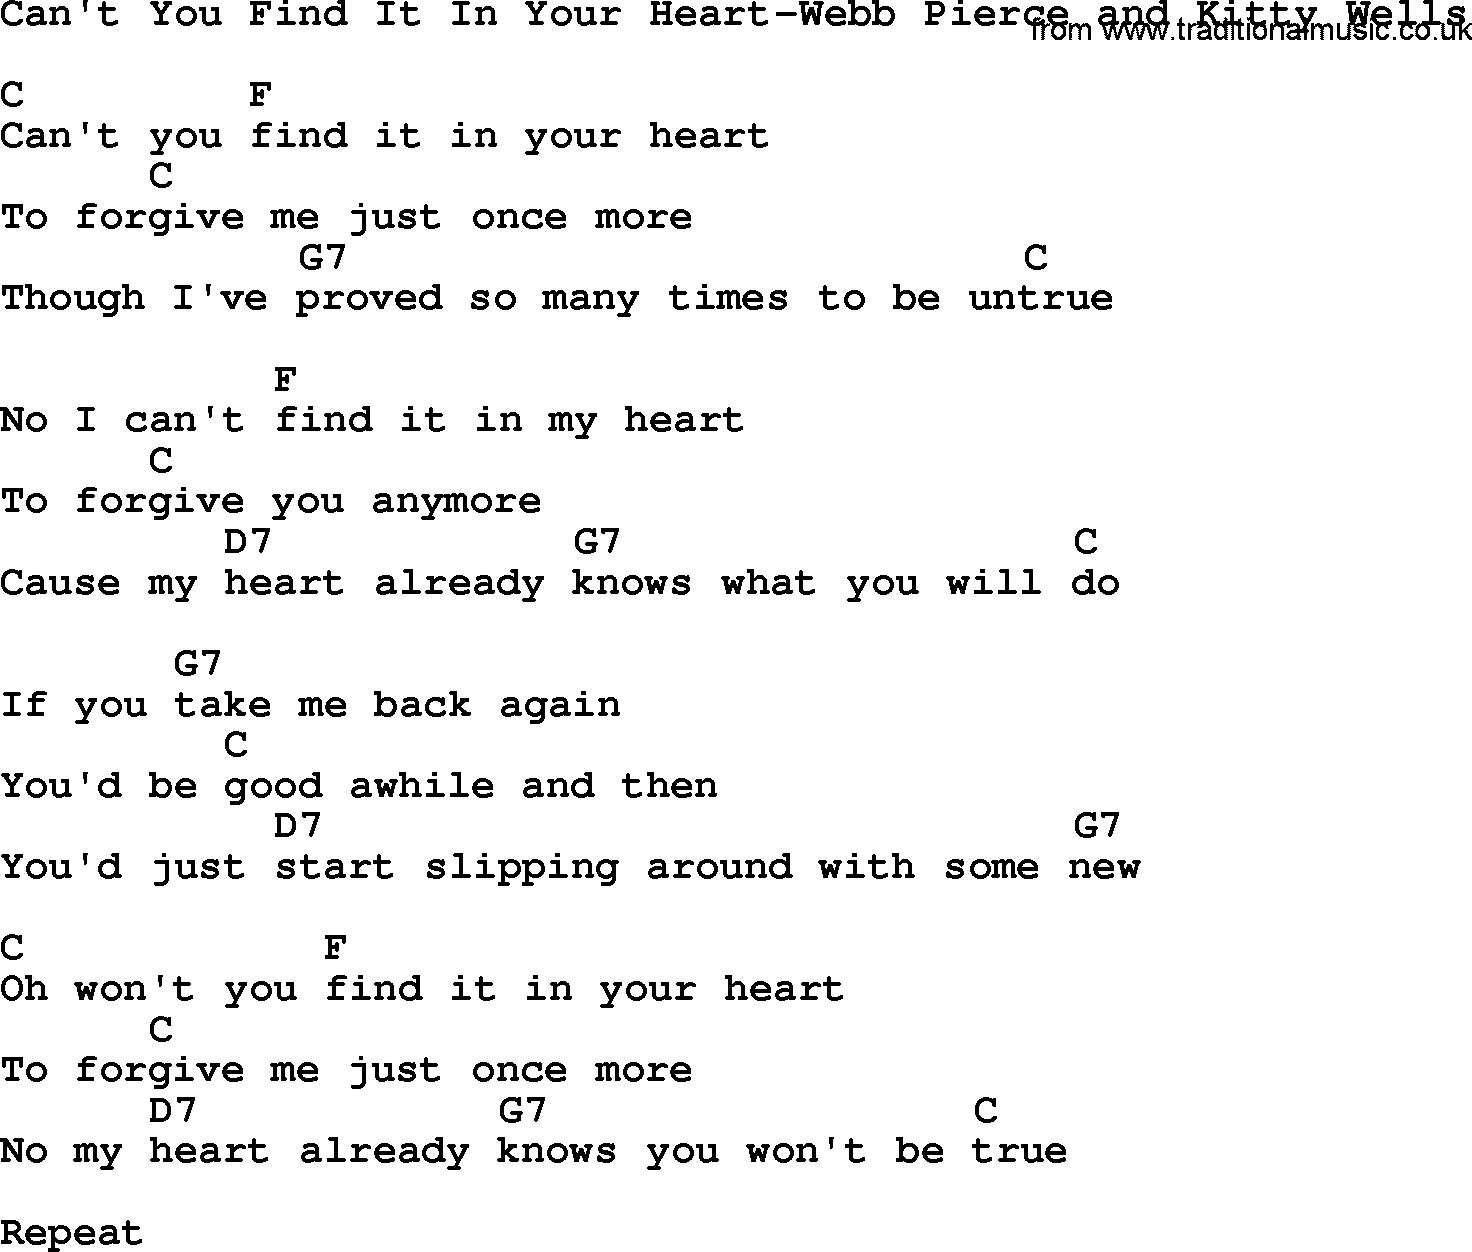 Country music song: Can't You Find It In Your Heart-Webb Pierce And Kitty Wells lyrics and chords